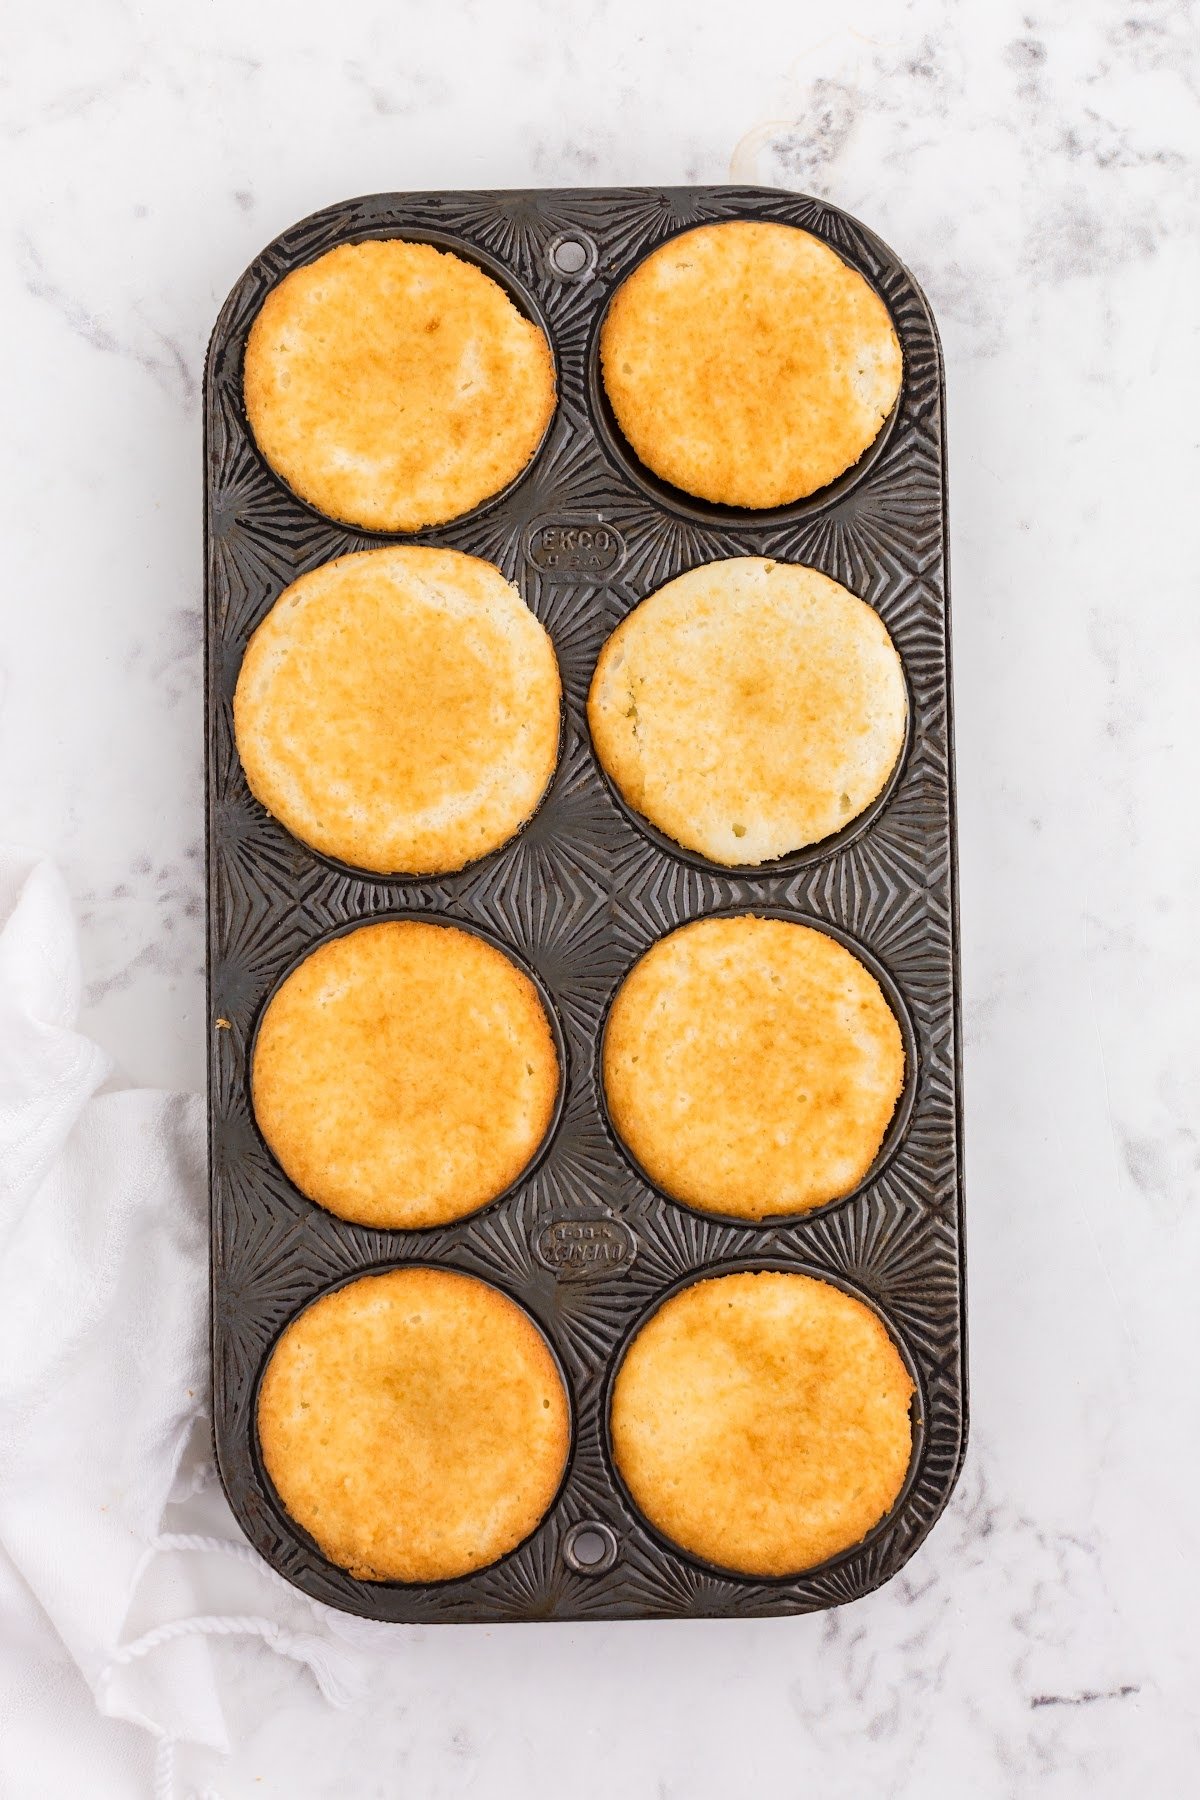 Baked cupcakes until golden brown.